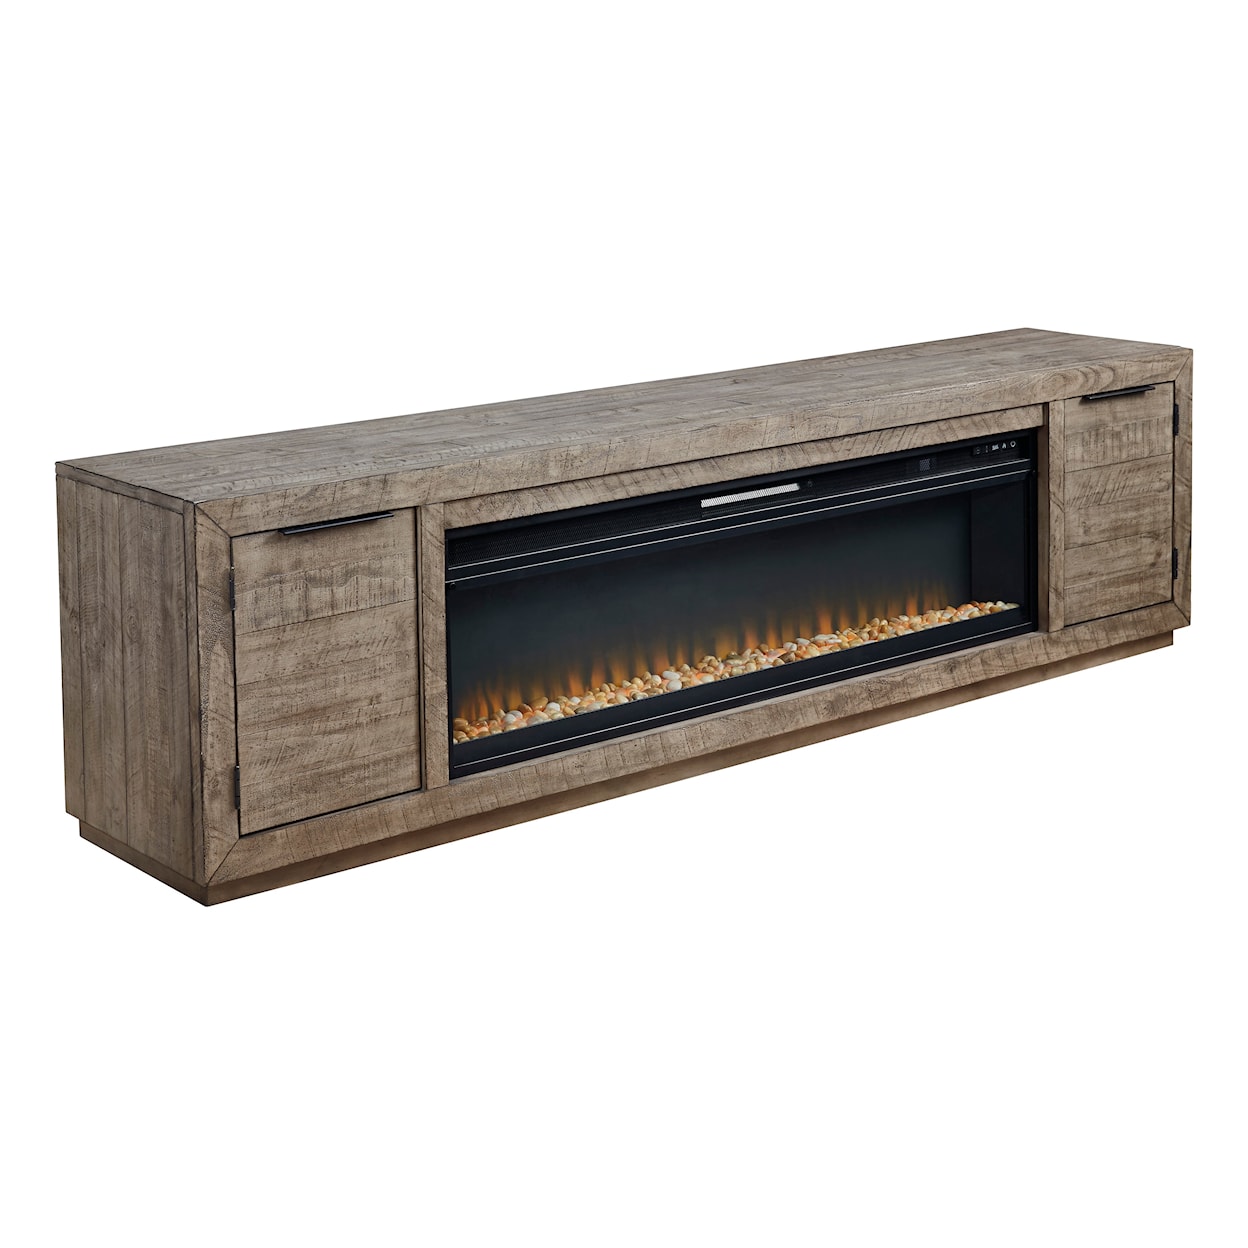 Ashley Furniture Signature Design Krystanza TV Stand with Electric Fireplace